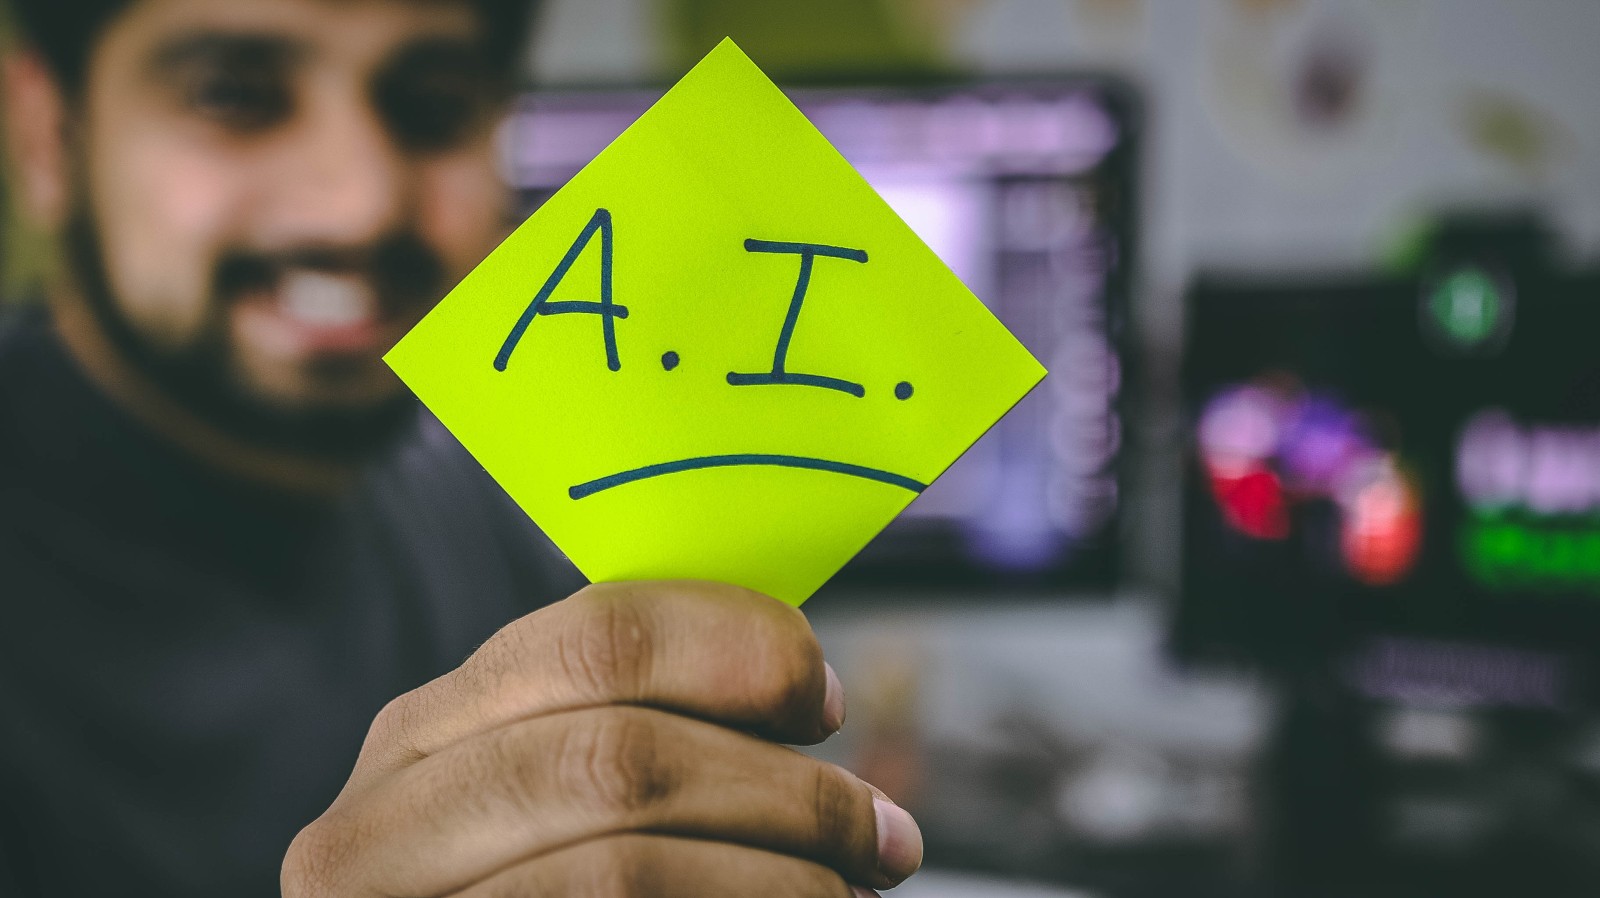 AI is expected to impact every aspect of our lives. (Hitesh Choudhary/Unsplash)